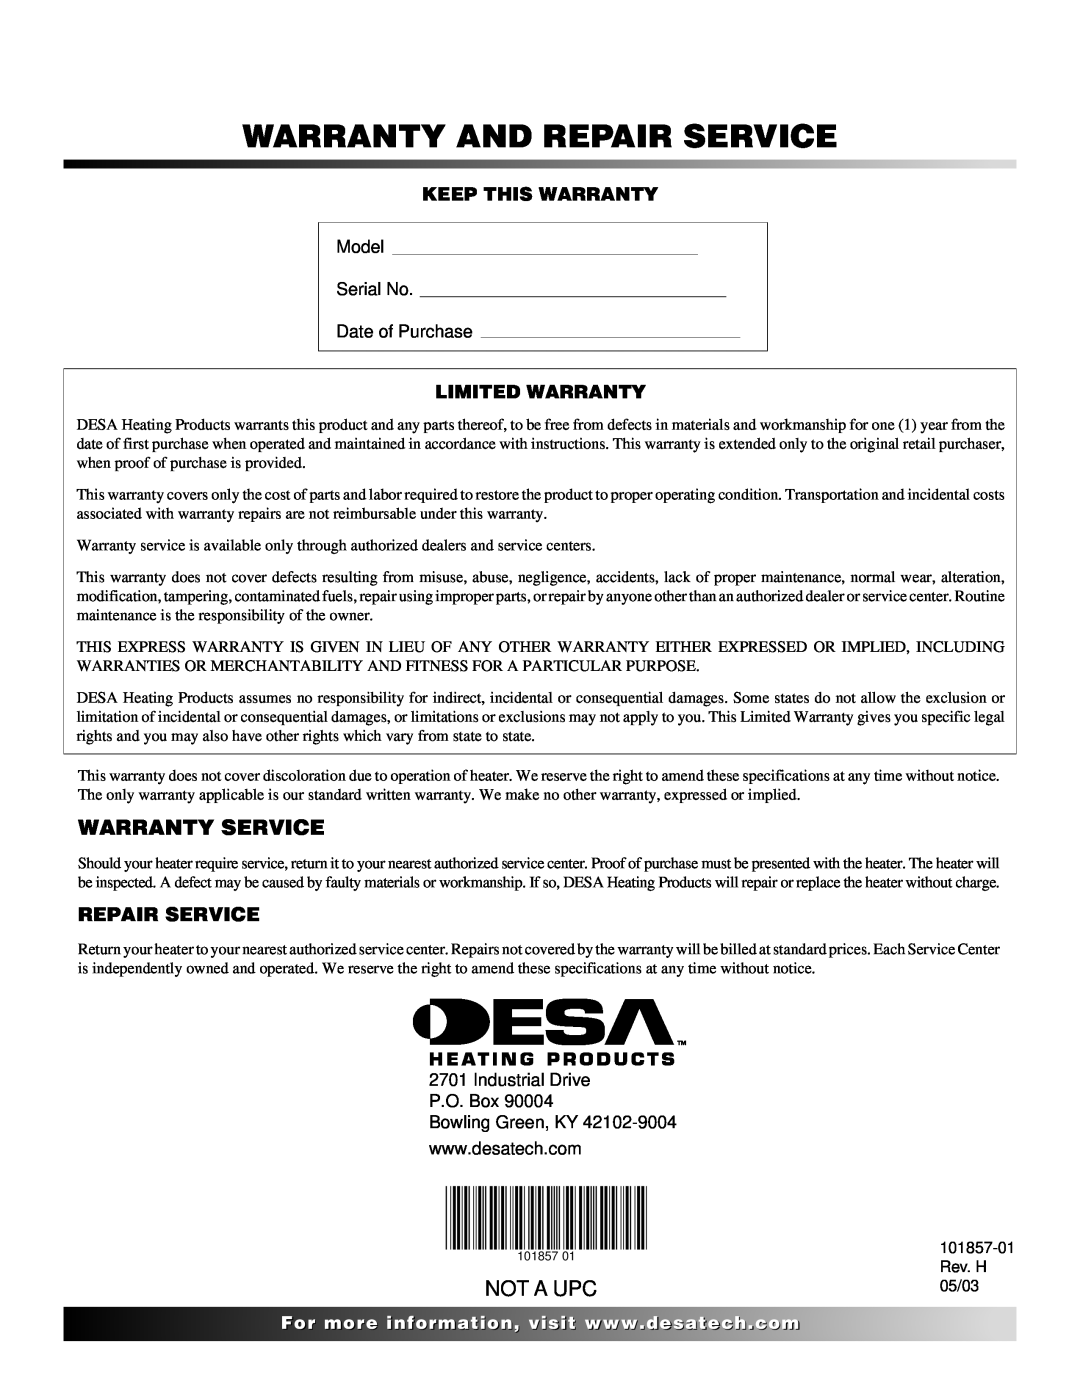 Desa TC25 owner manual Warranty And Repair Service, Not A Upc, Keep This Warranty, Limited Warranty 